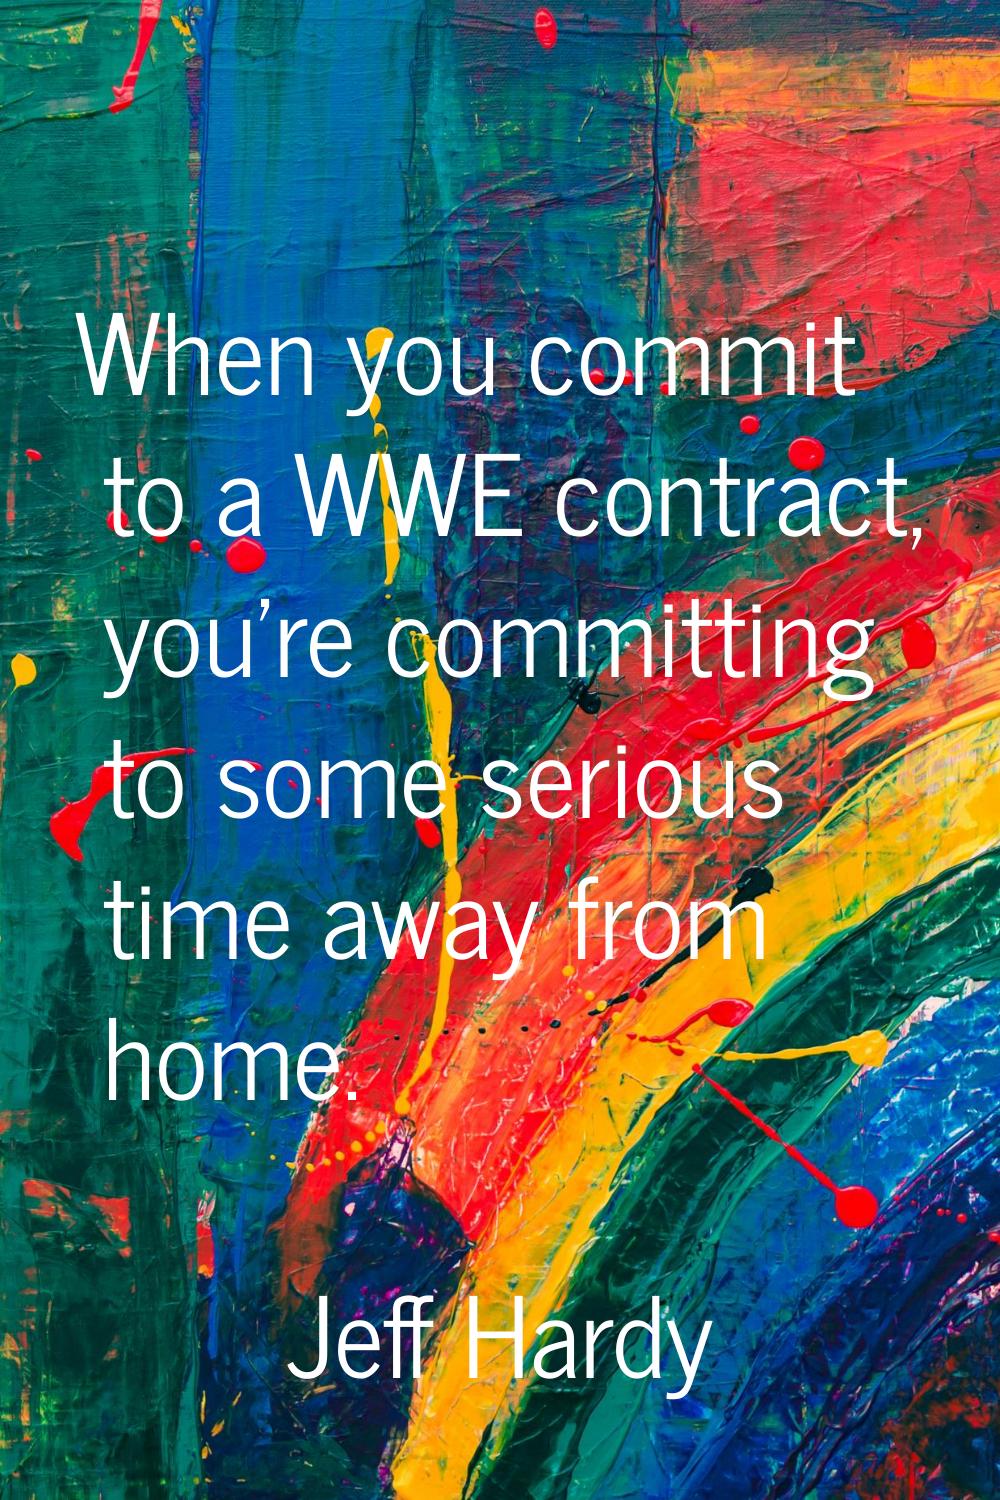 When you commit to a WWE contract, you're committing to some serious time away from home.